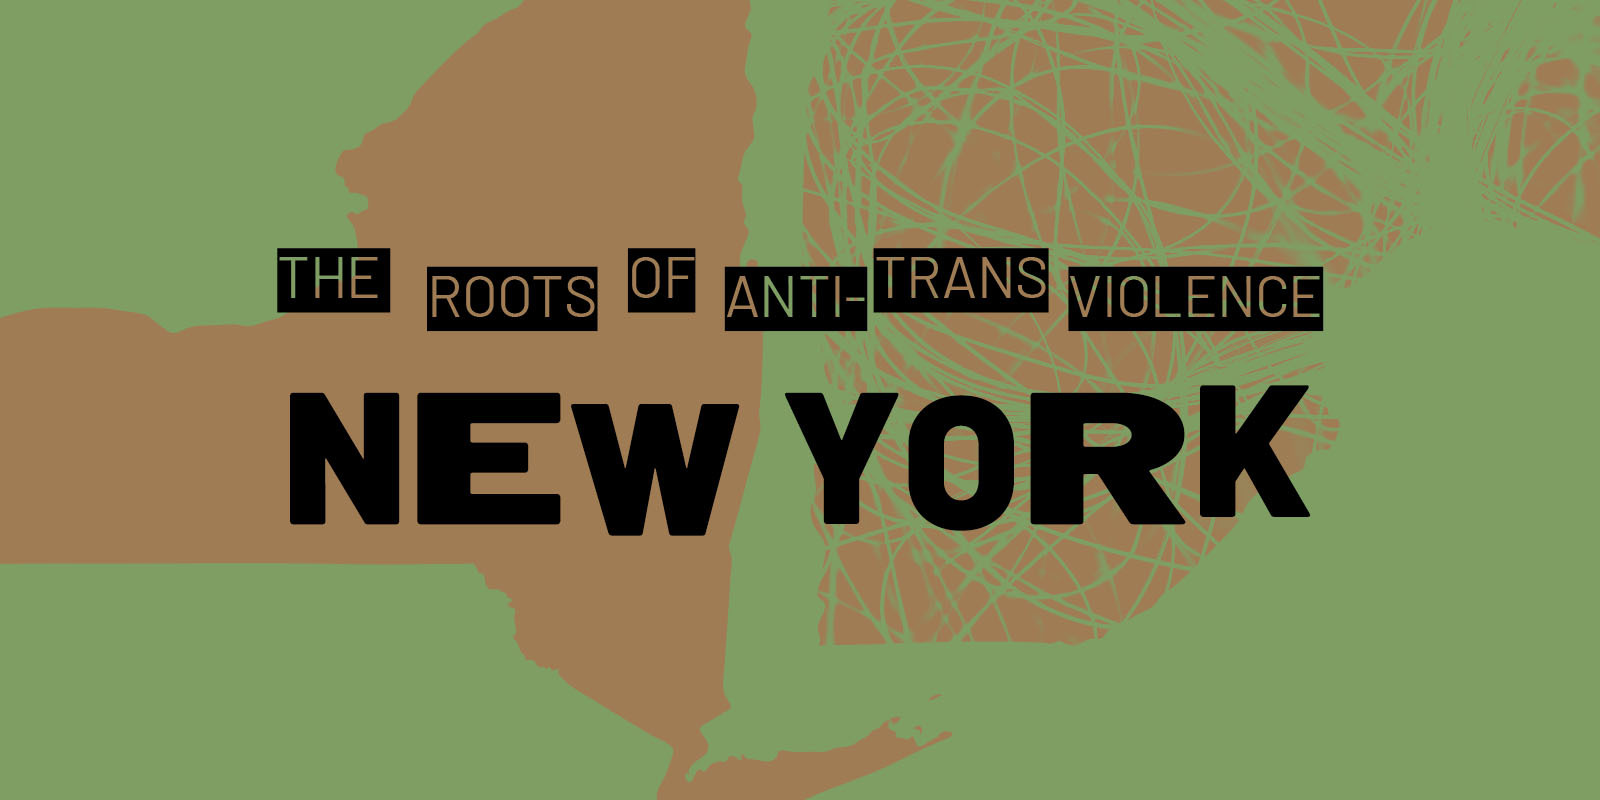 The Roots of Anti-Violence: New York is set against a green background.